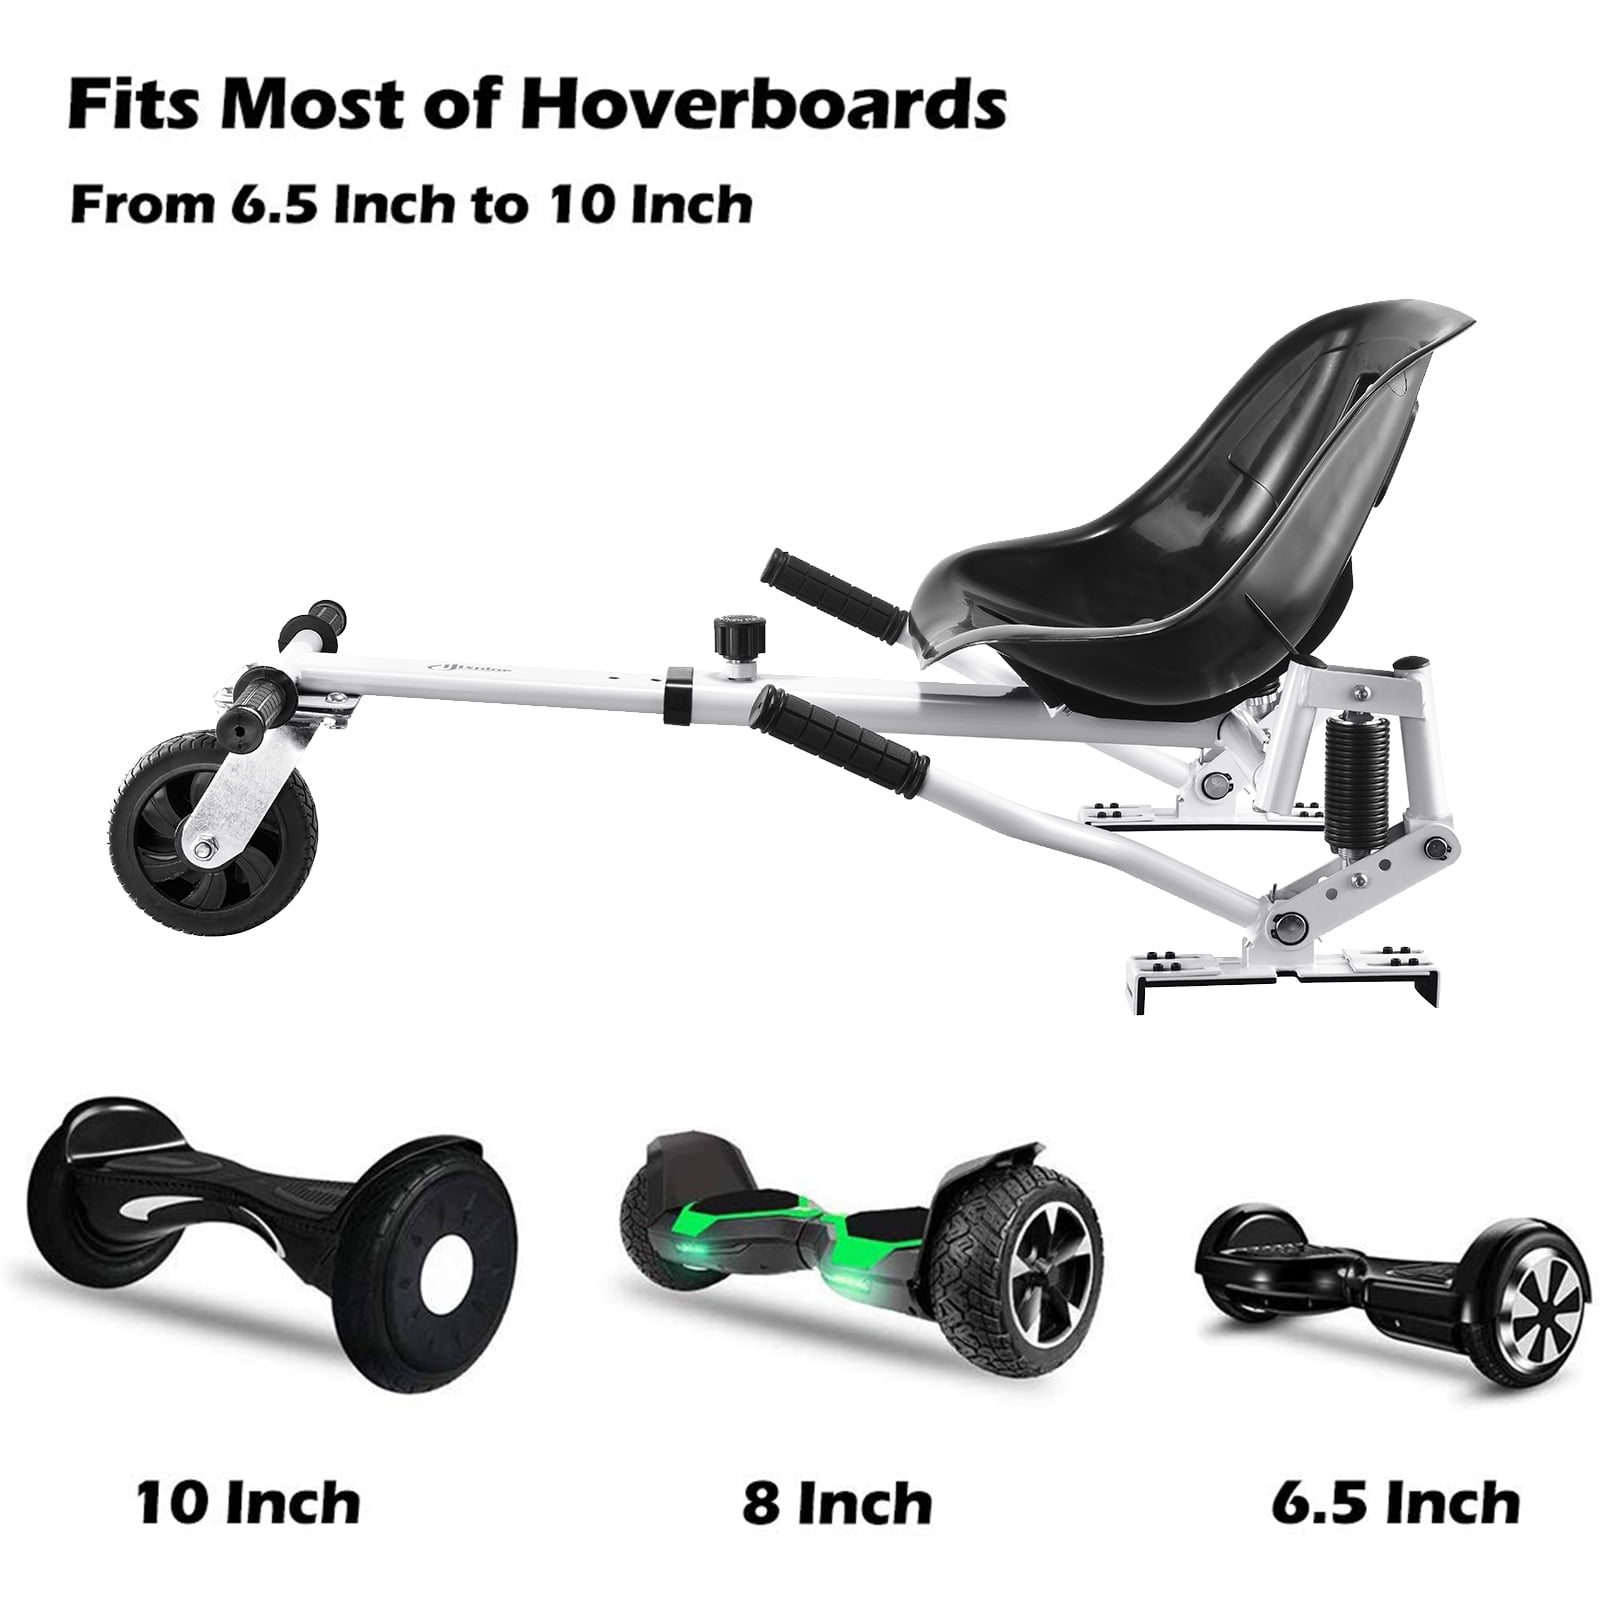 All Heights-All Ages,for Kids and Adults Not Included hoverboards Emaxusa Hoverboard Kart Seat Attachment,Go Kart Conversion Kit Hover Board Accessories with Adjustable Frame Length Compatible